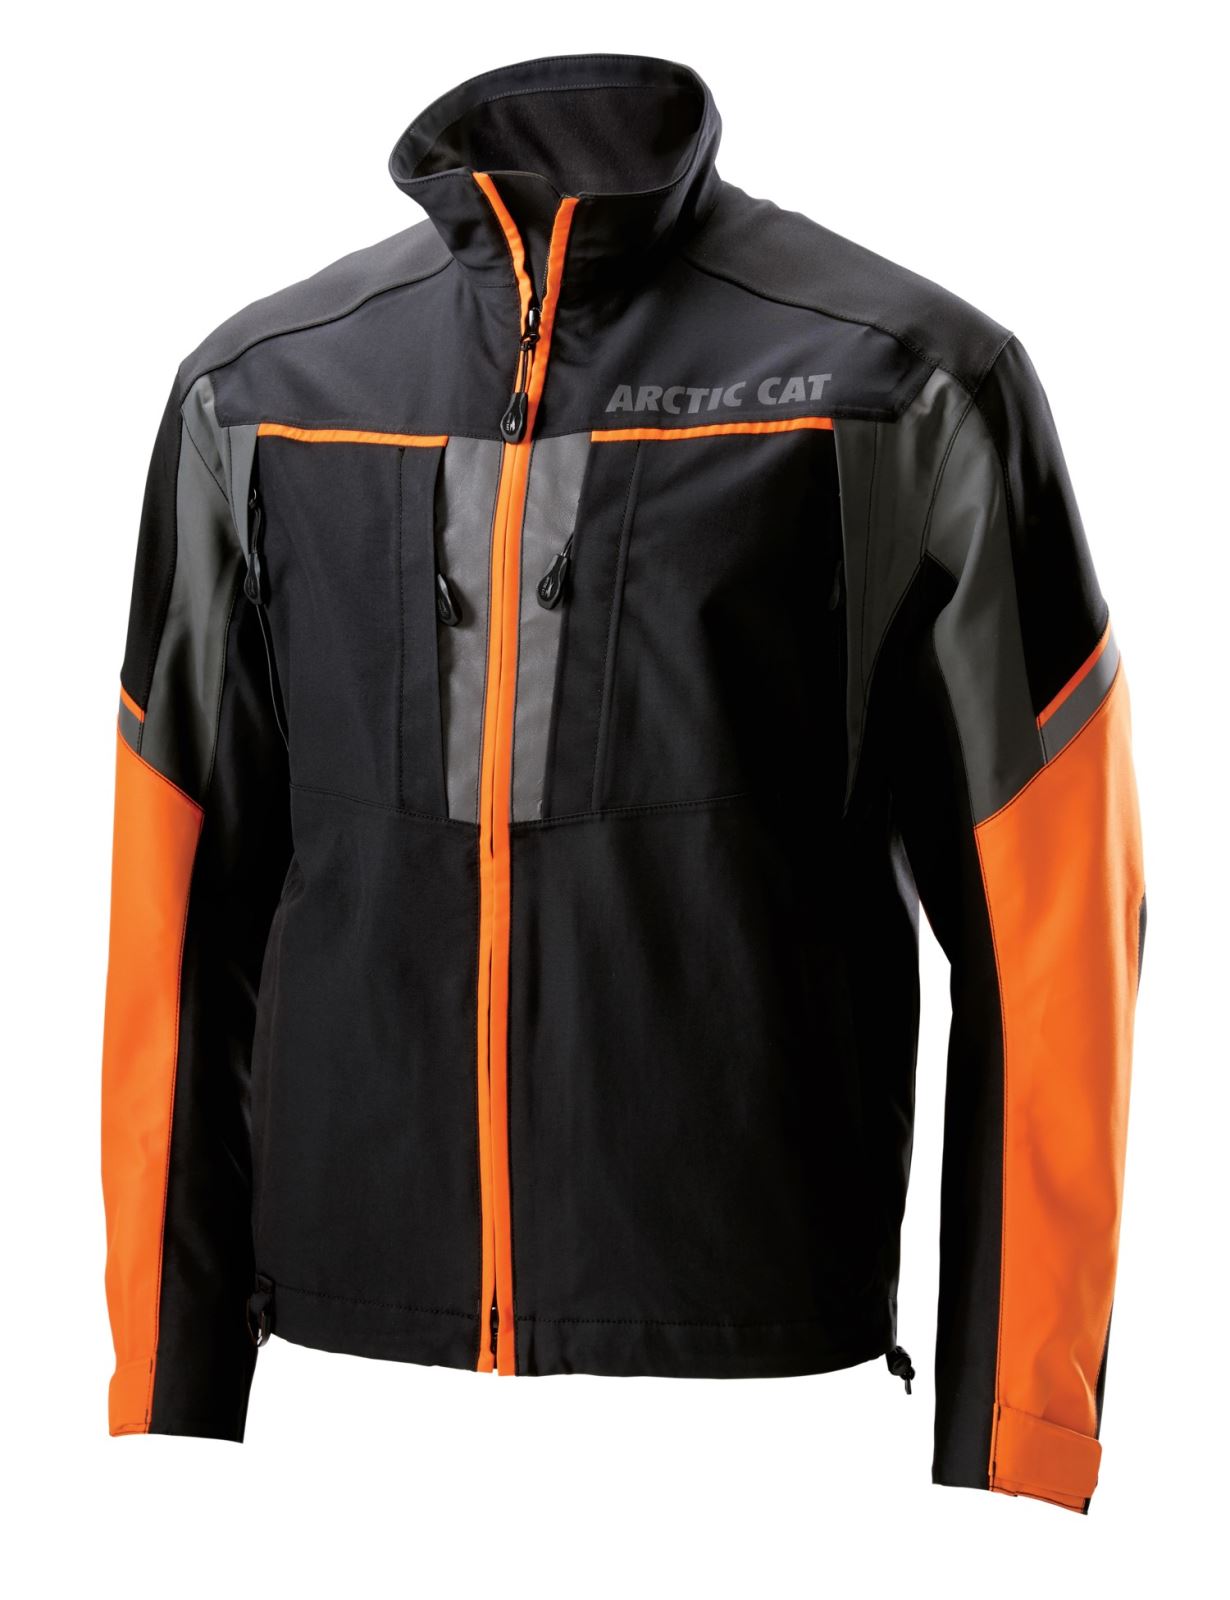 New Highland Jacket From Arctic Cat Maximize mountain, crossover ...